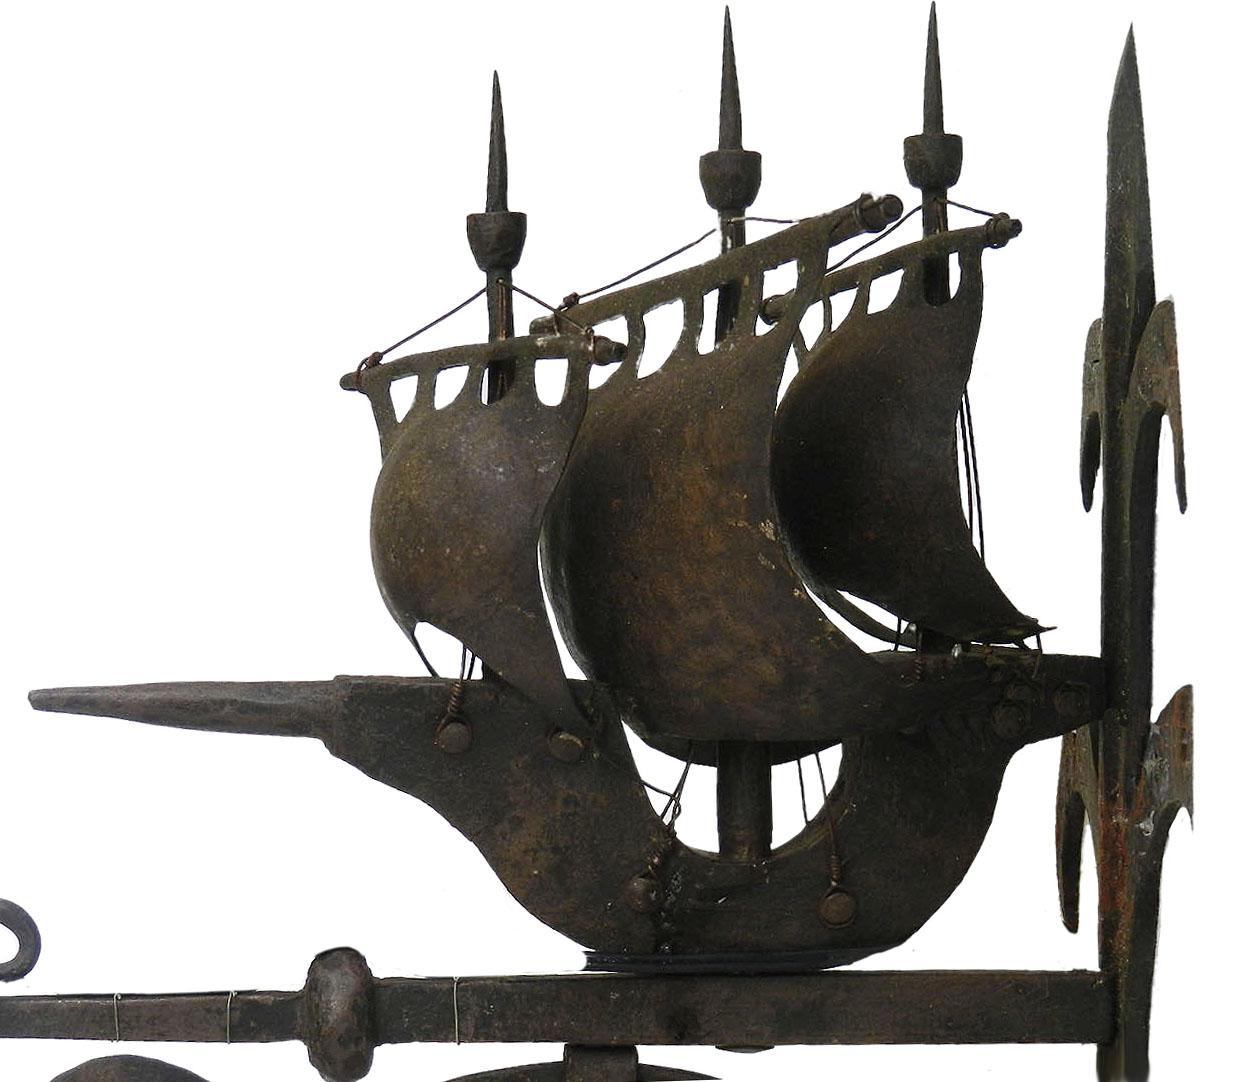 Pair Sconces Wrought Iron one of a kind attributed to Gilbert Poillerat, circa 1930
Rare and unique from Atelier Poillerat
With midcentury Arts & Crafts Neo Baroque influences typical in works by Poillerat
Hand forged sculpture with galleons 
Hung